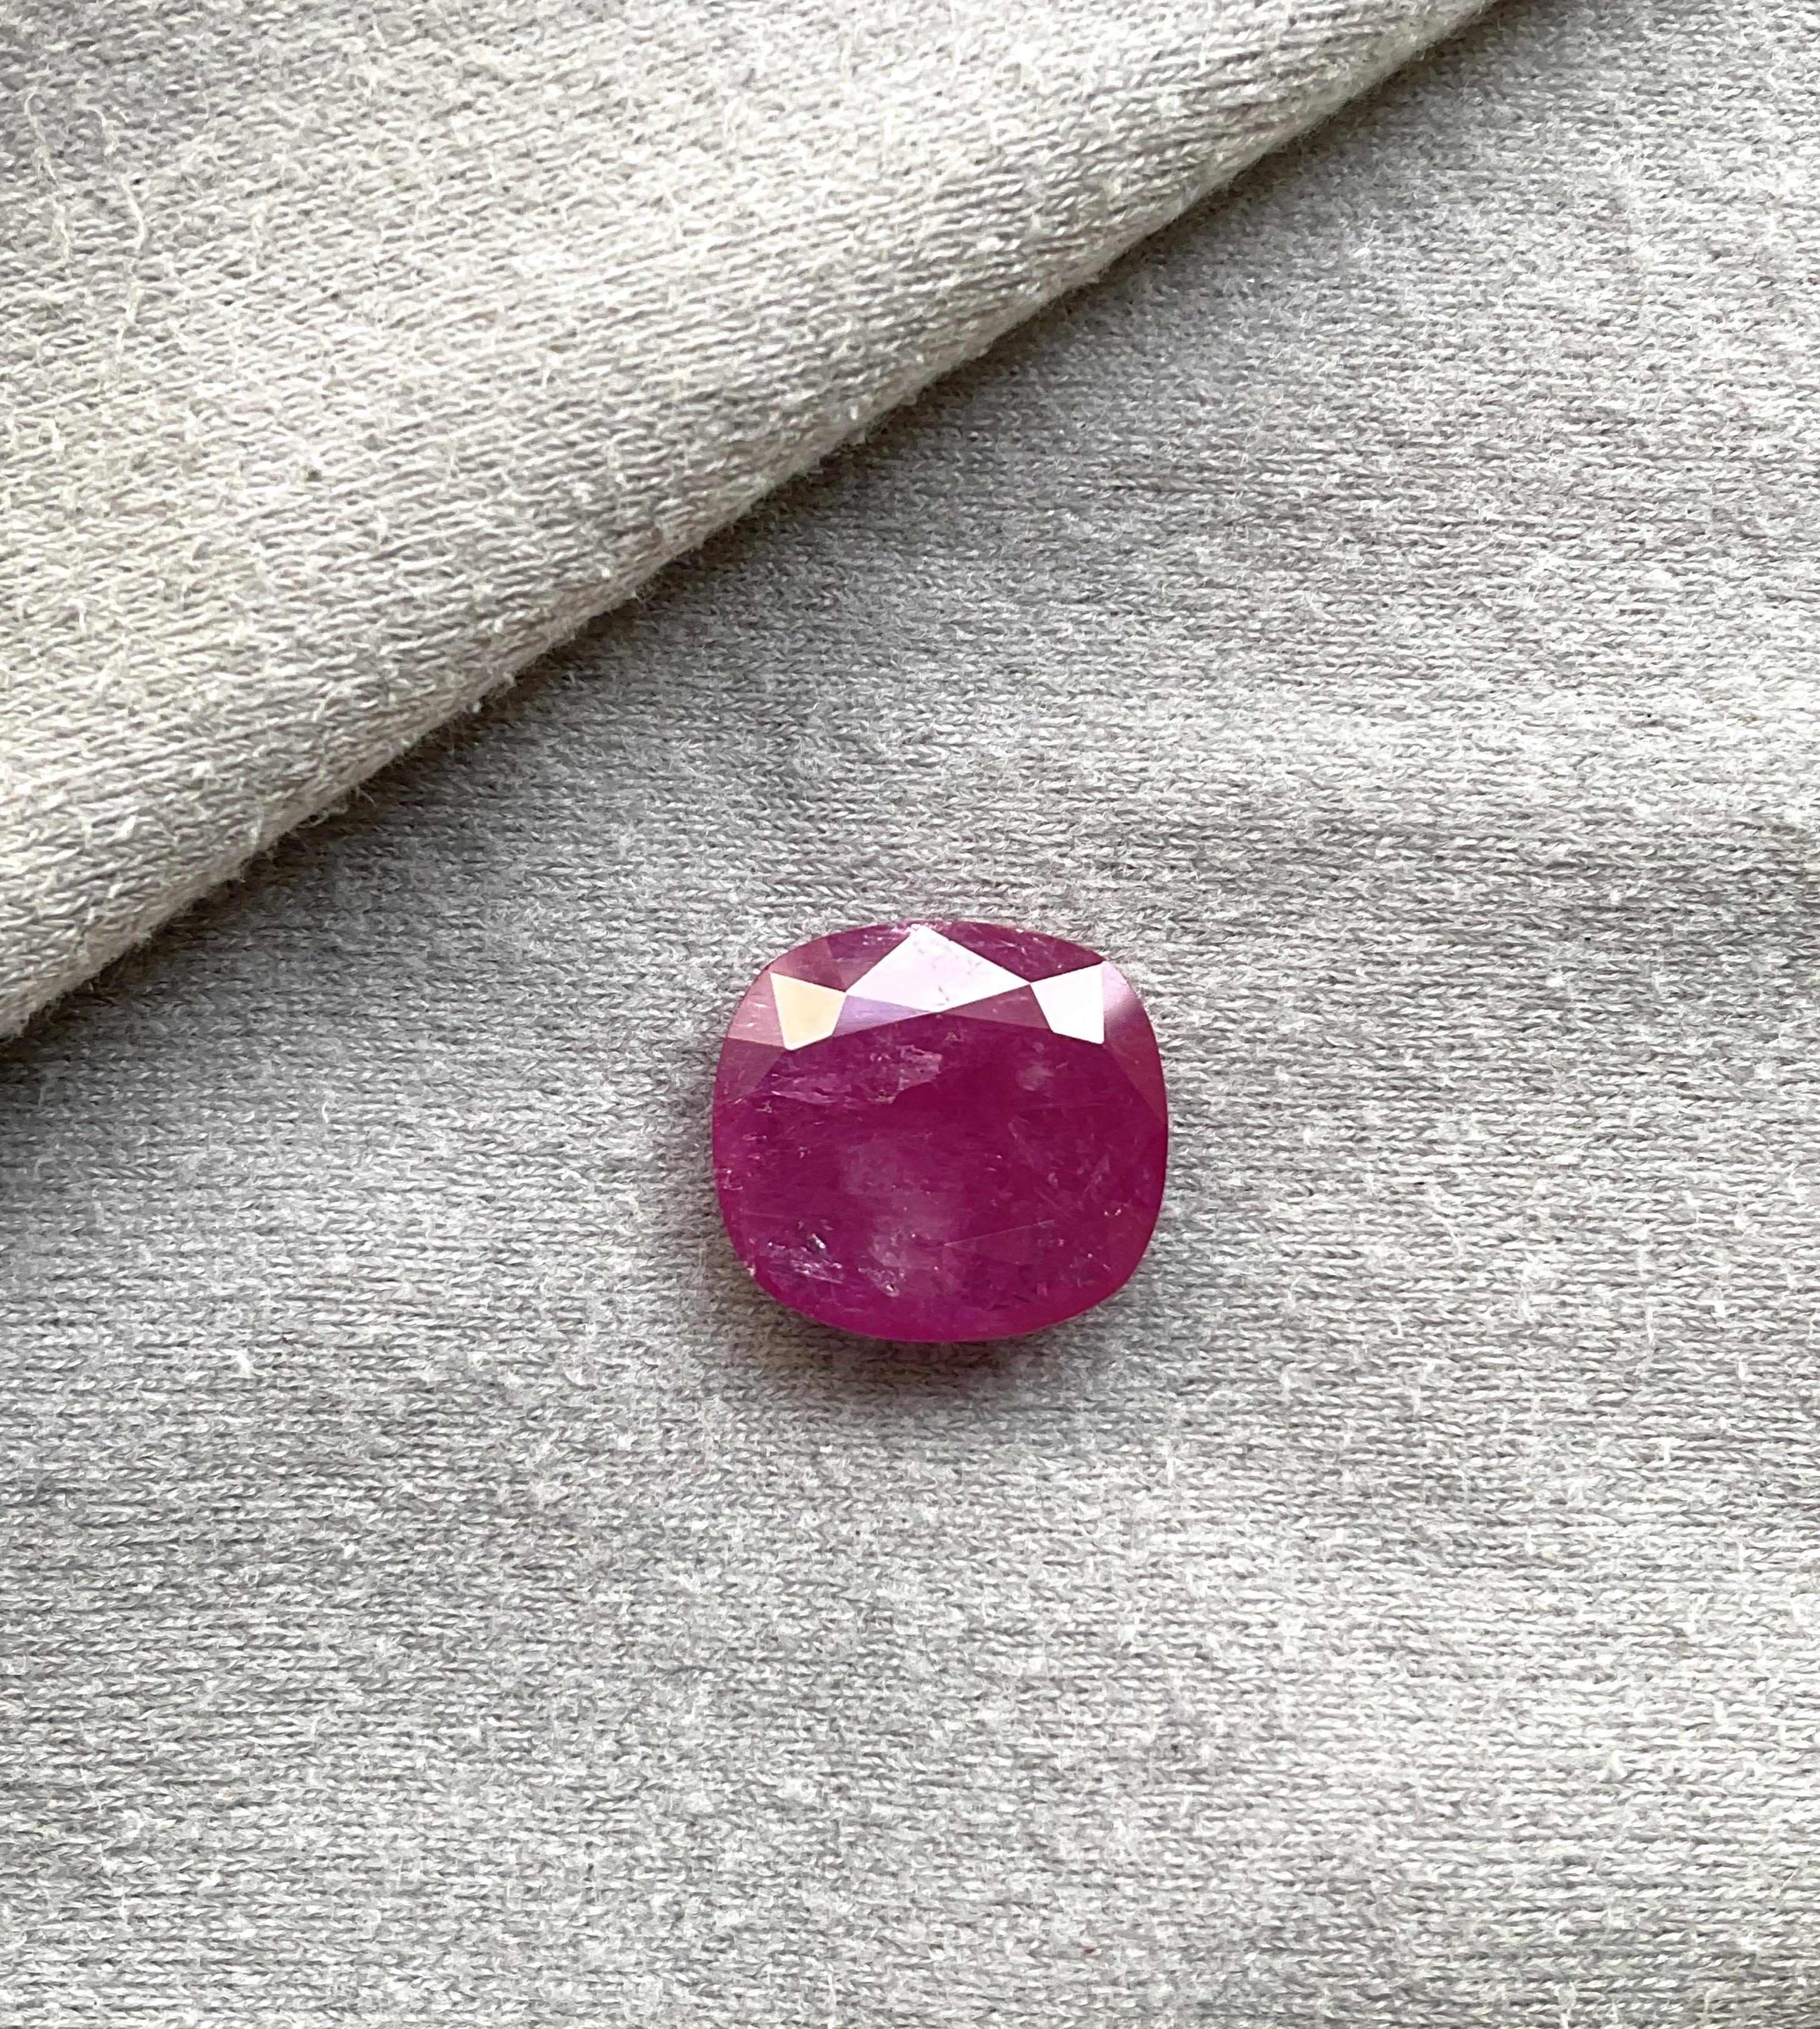 As we are auction partners at Gemfields, we have sourced these rubies from winning auctions and had cut them in our in house manufacturing responsibly.

Weight: 13.11 Carats
Size: 15x16x4.6 MM
Pieces: 1
Shape: Faceted cushion Cut stone